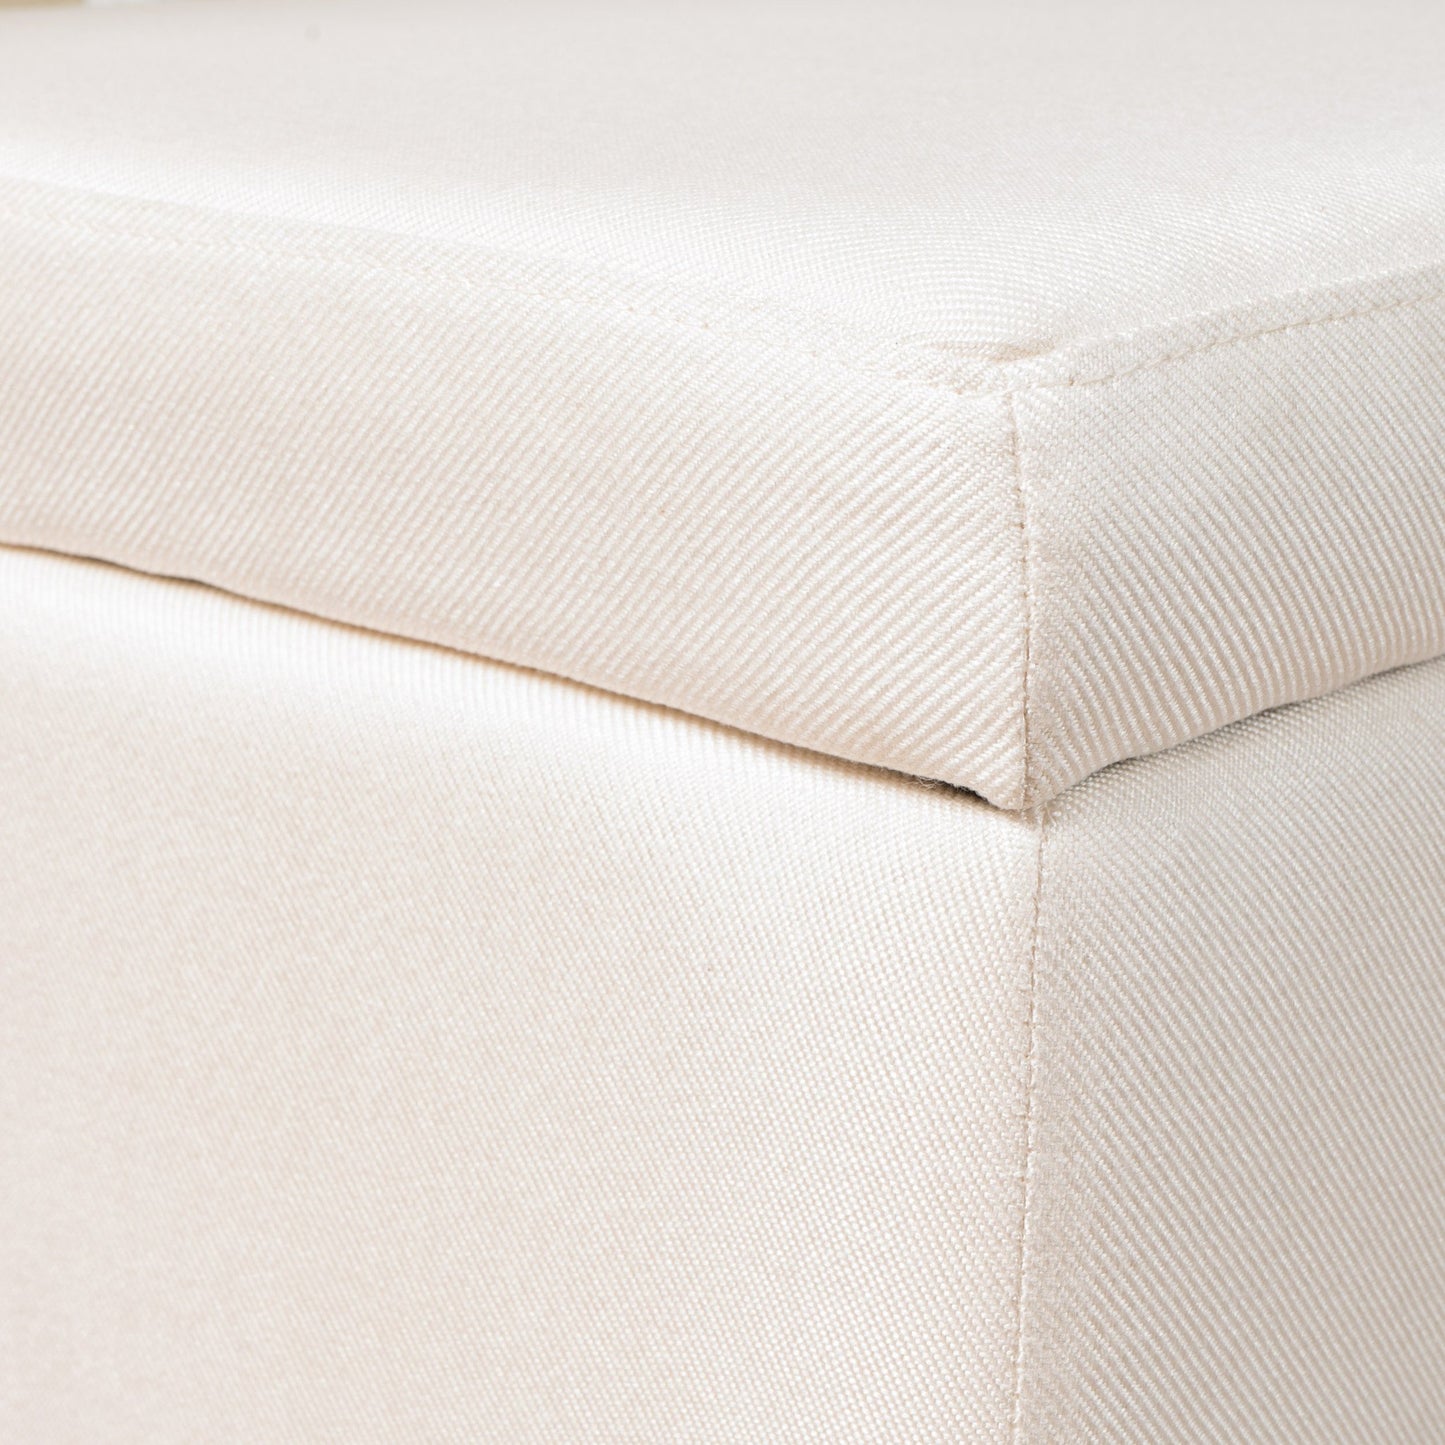 Labella Contemporary Fabric Upholstered Storage Ottoman with Nailhead Trim